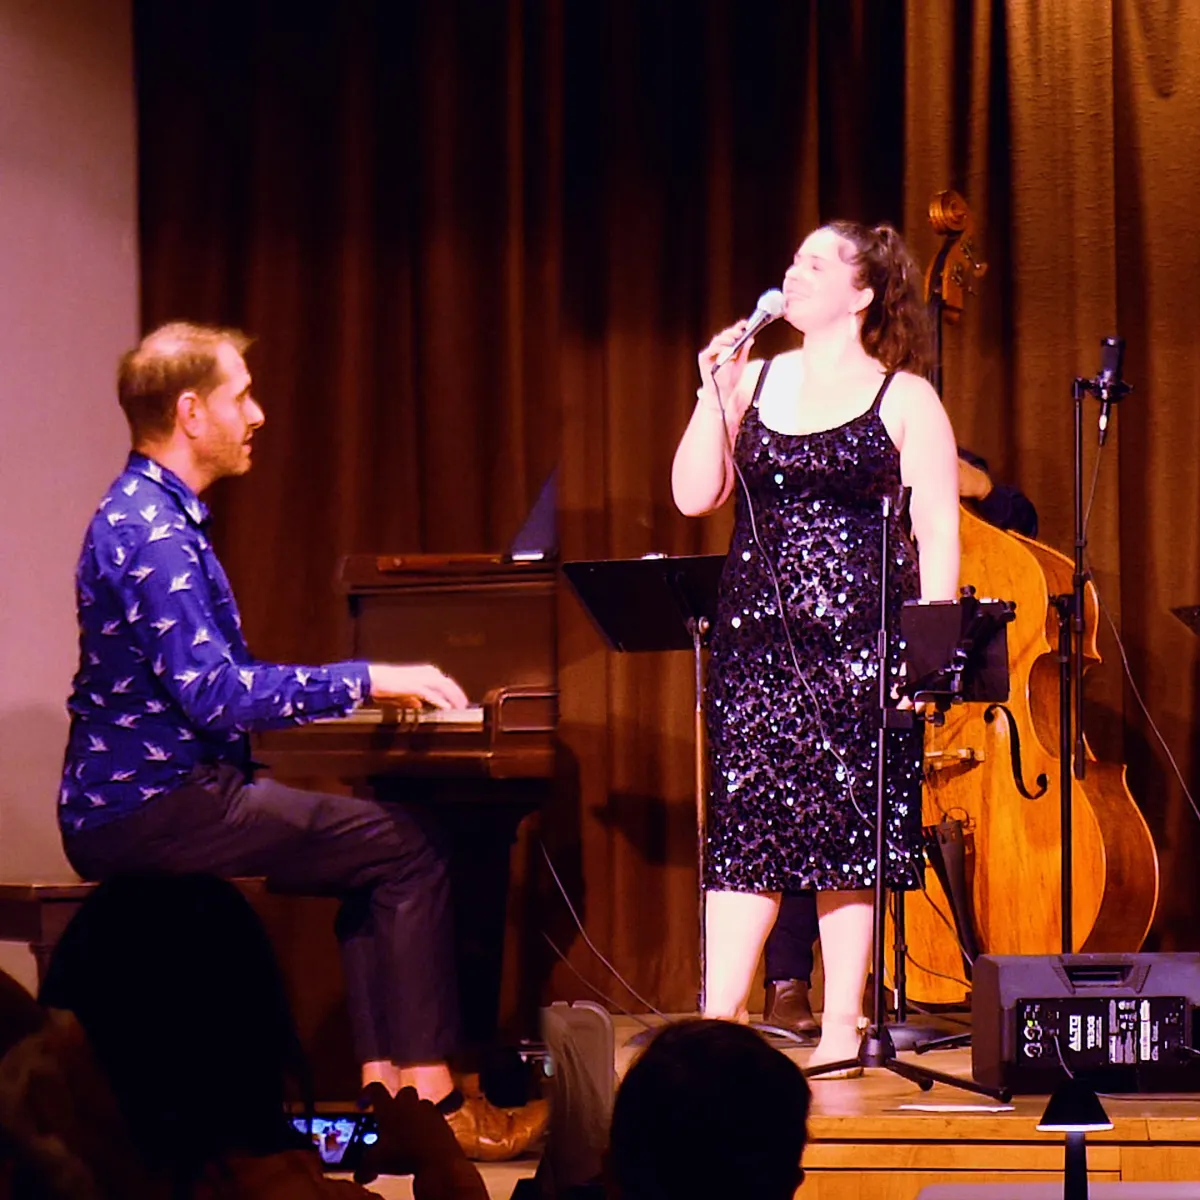 Jazz singer Maria Schafer and pianist Jeremy Siskind share the stage at Alhambra Performing Arts Center in California